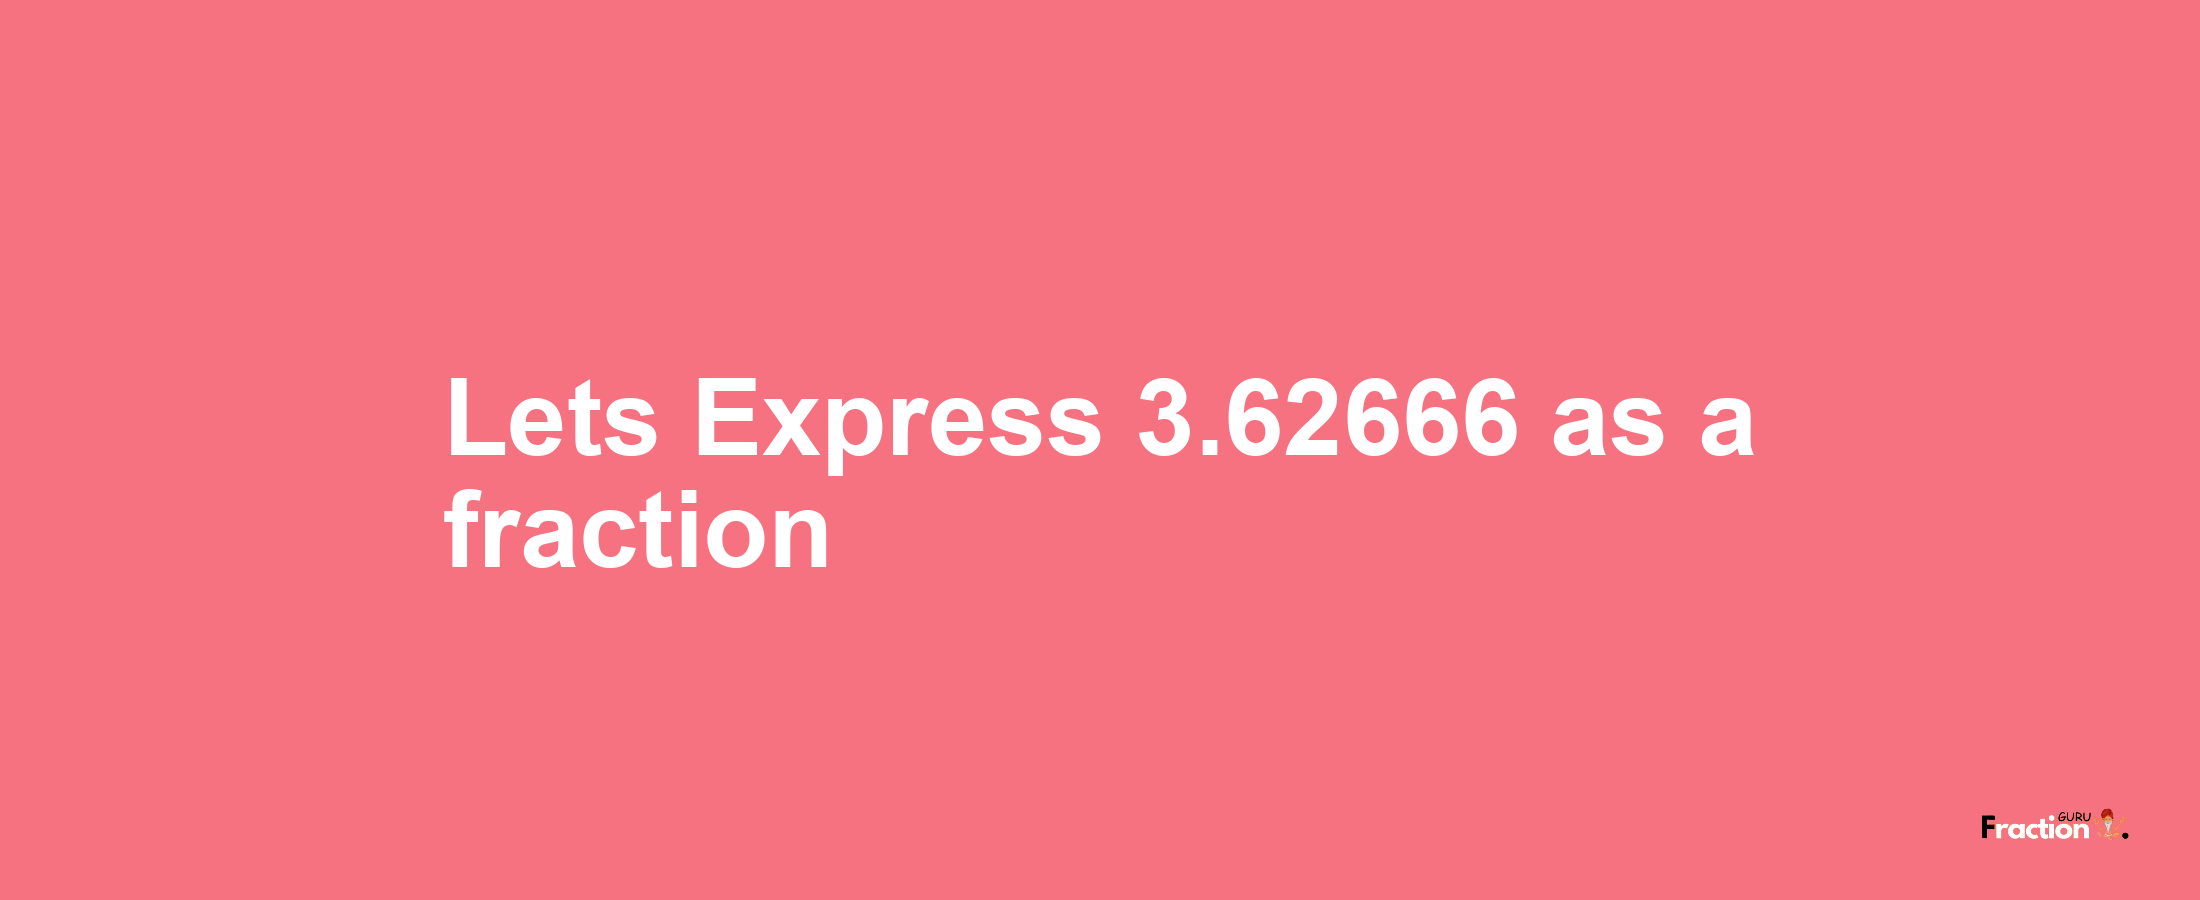 Lets Express 3.62666 as afraction